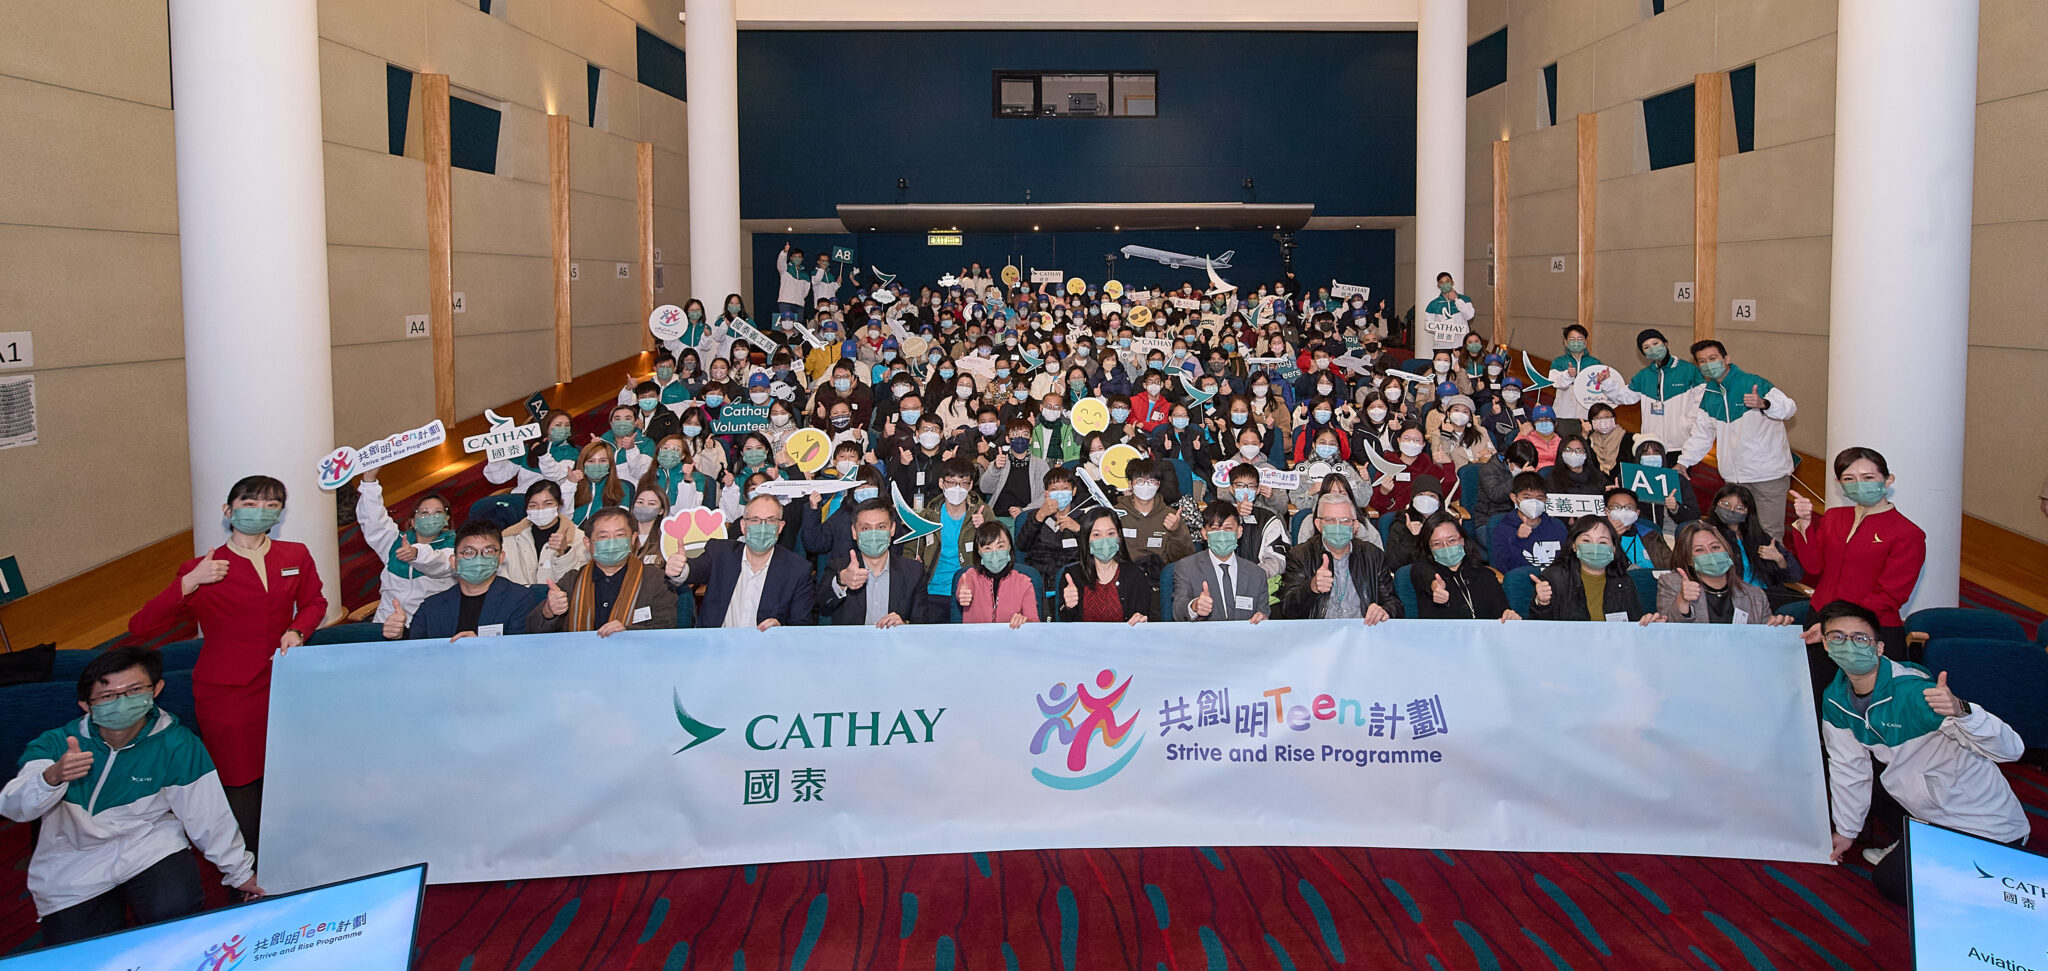 cathay-participates-in-‘strive-and-rise-programme’